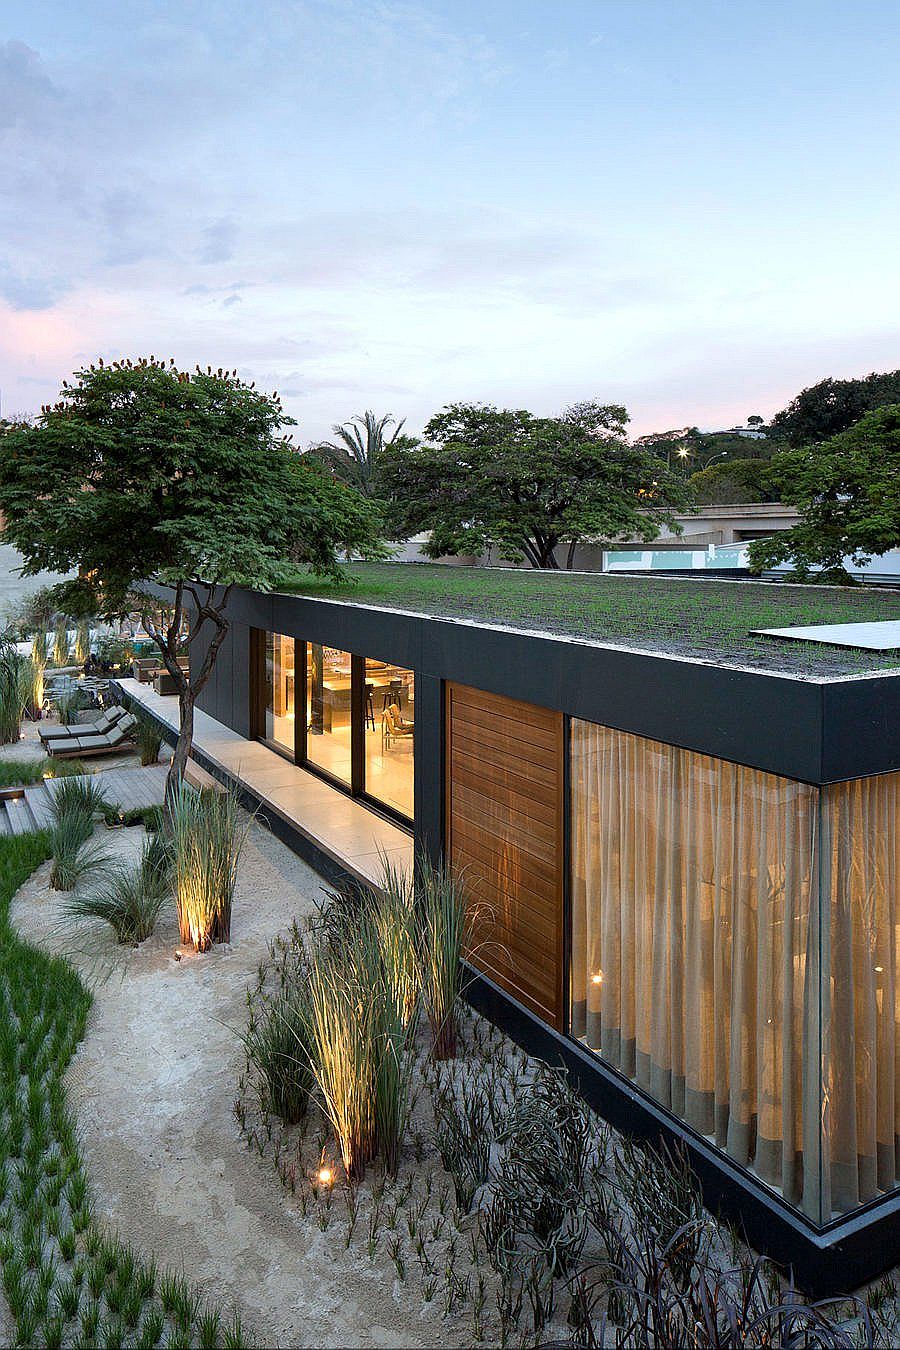 Green roof of the prefab coupled with solar panels powers the home